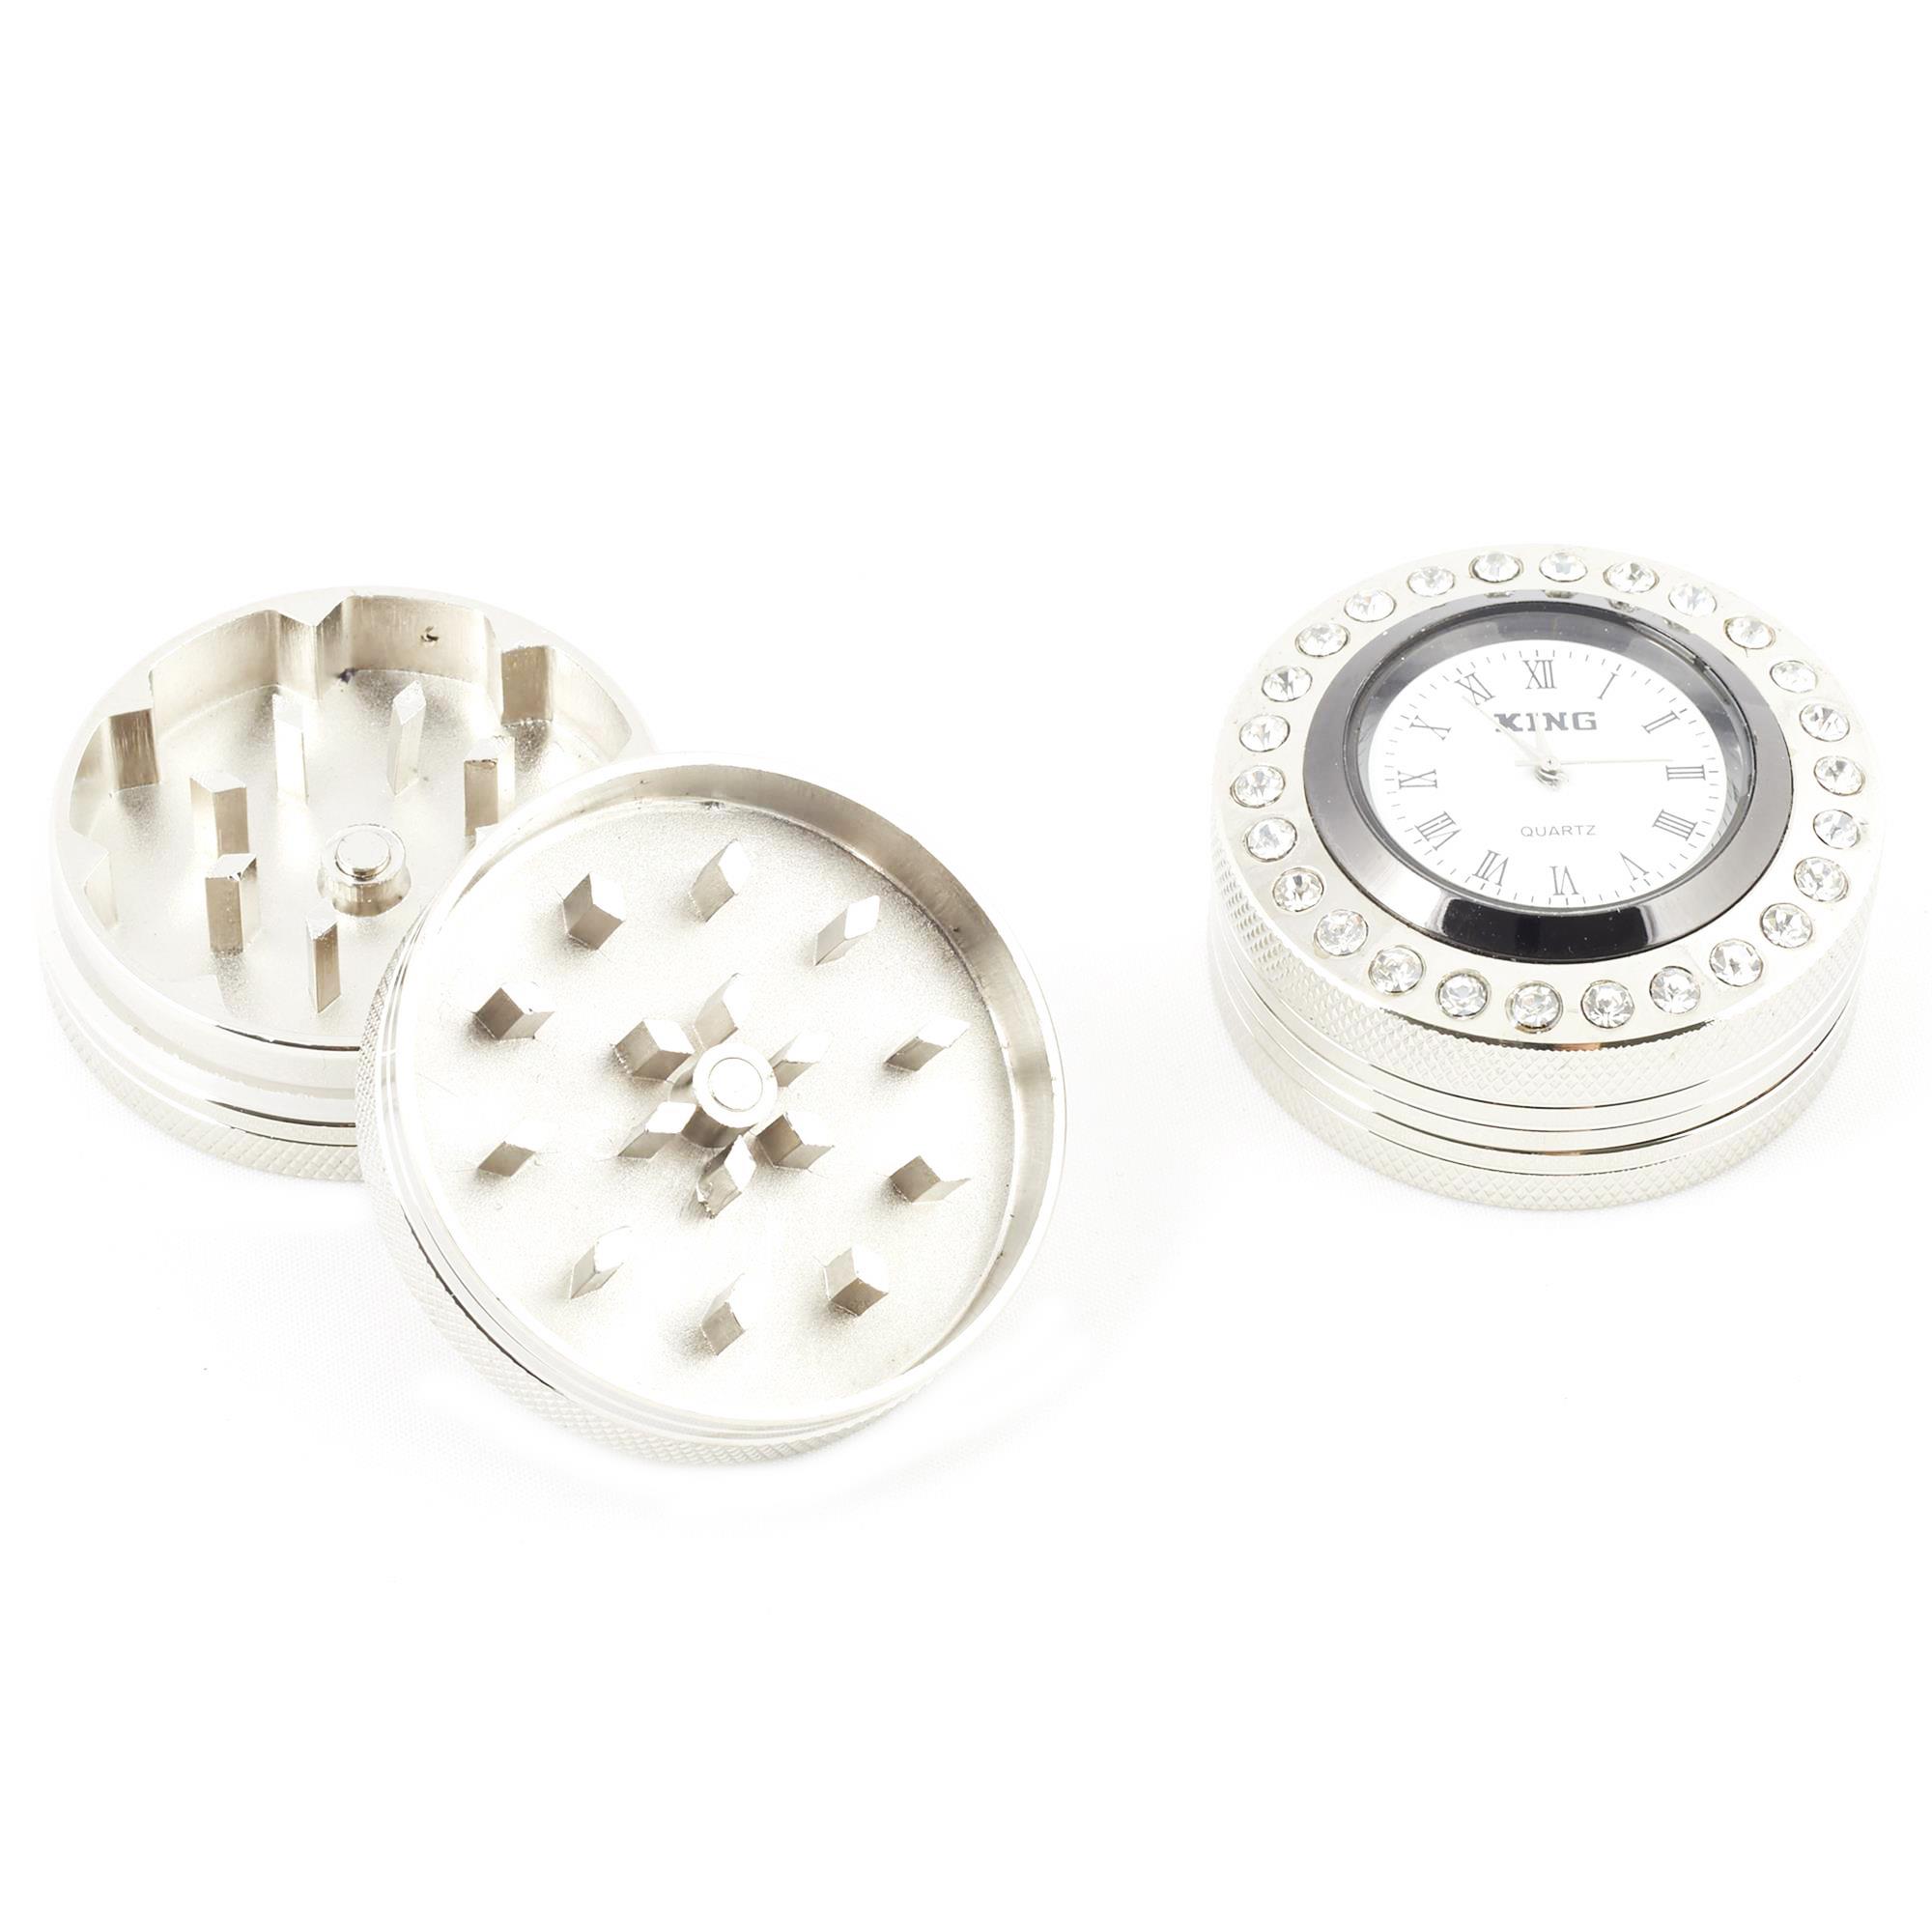 BLINGY WATCH GRINDER